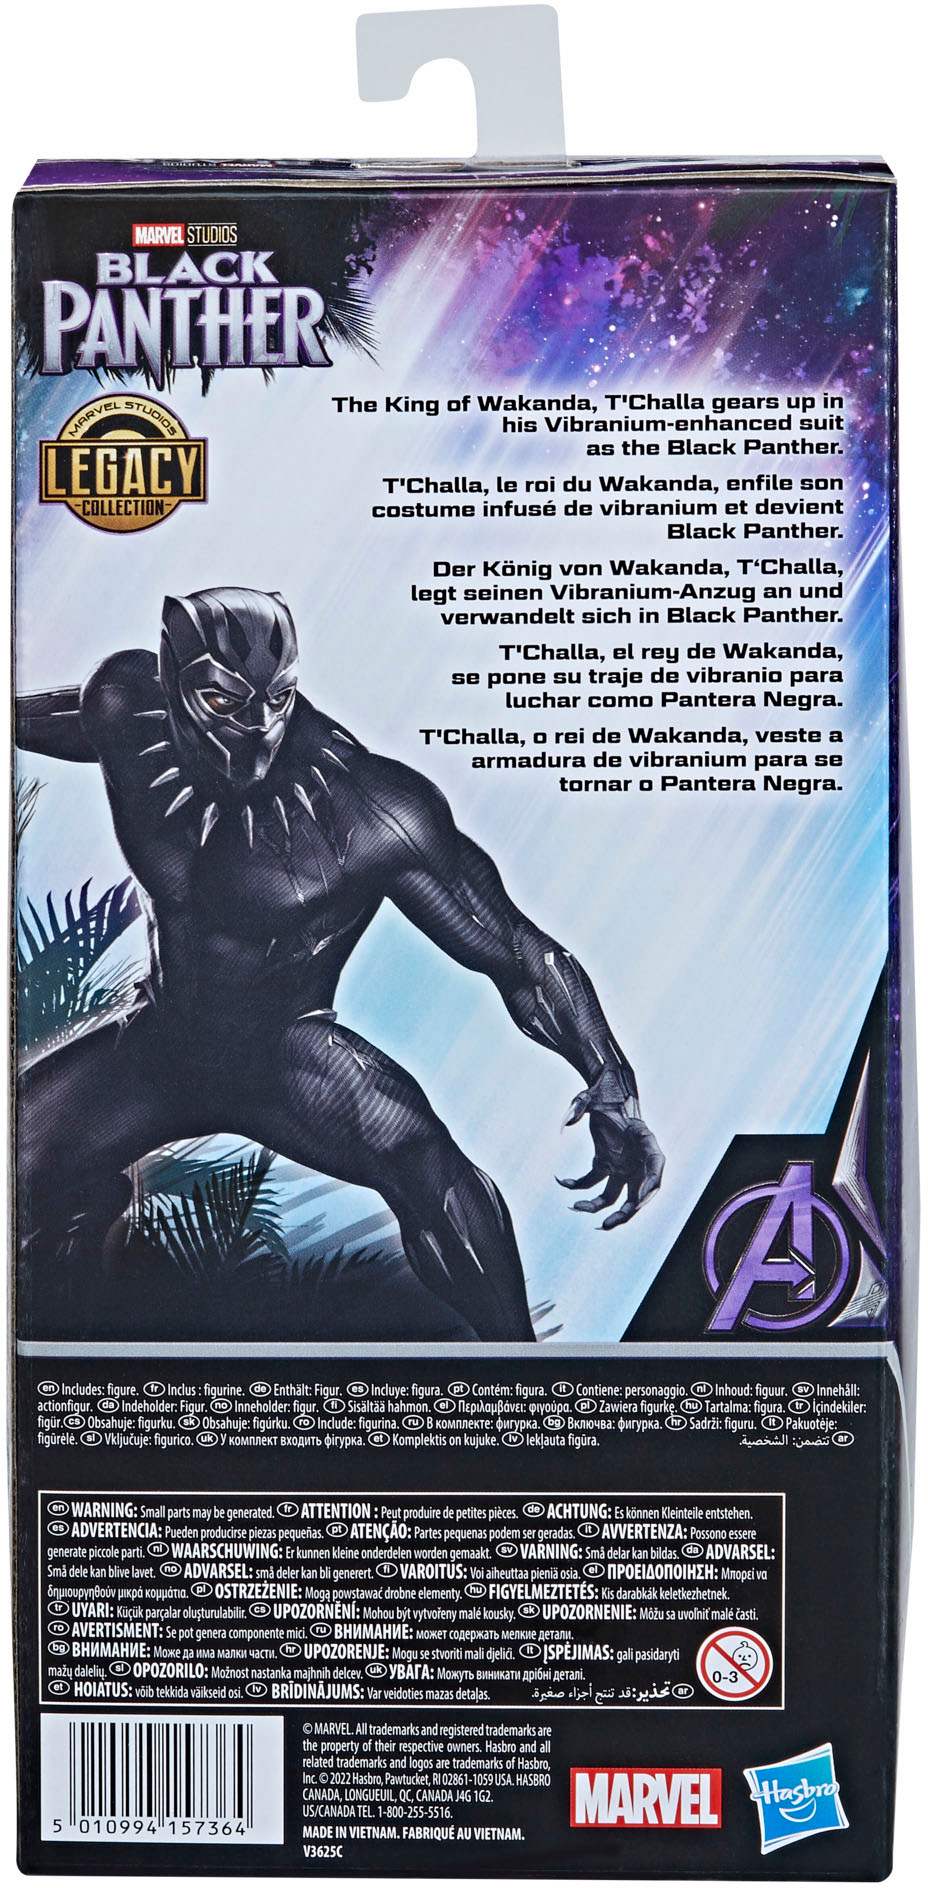 Best Buy: Marvel Black Panther Legacy Collection Black Panther F6330